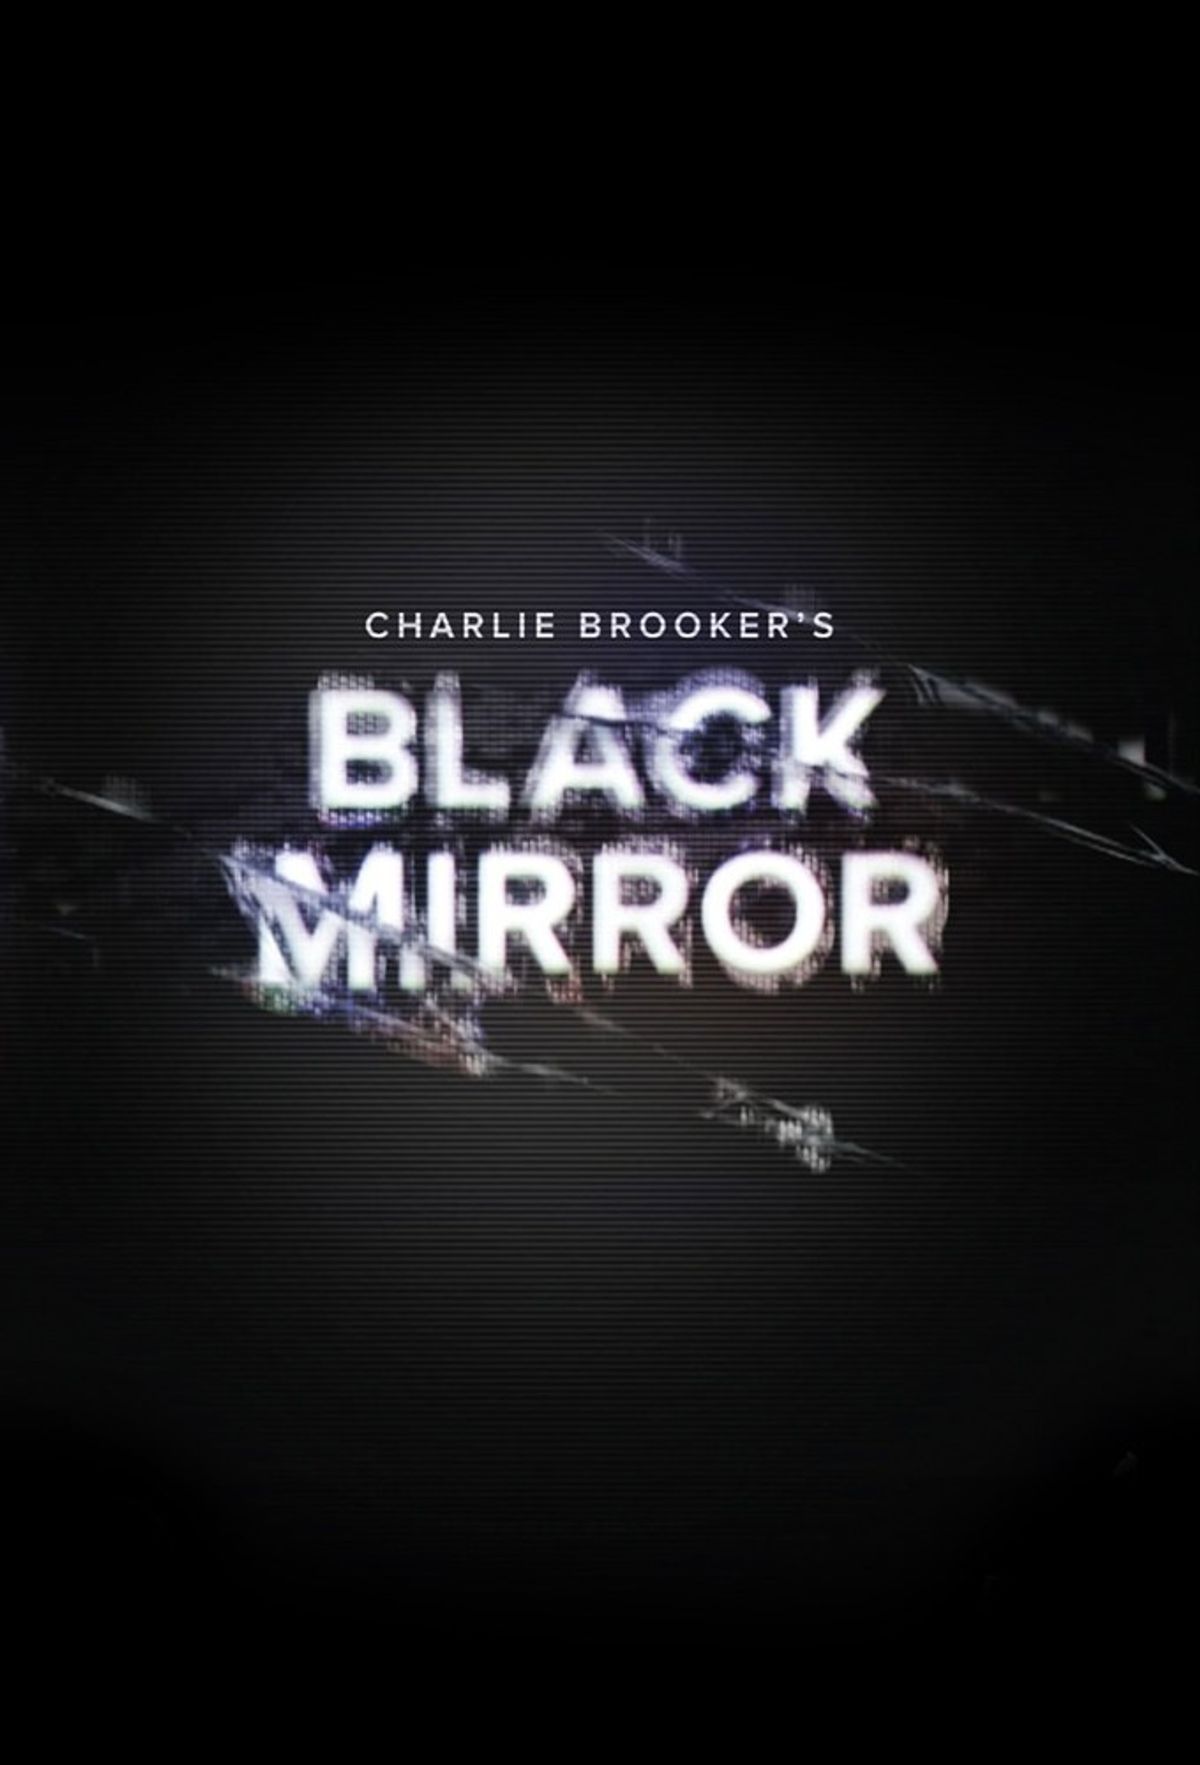 Artist Creates Comic Book Covers Inspired by "Black Mirror"